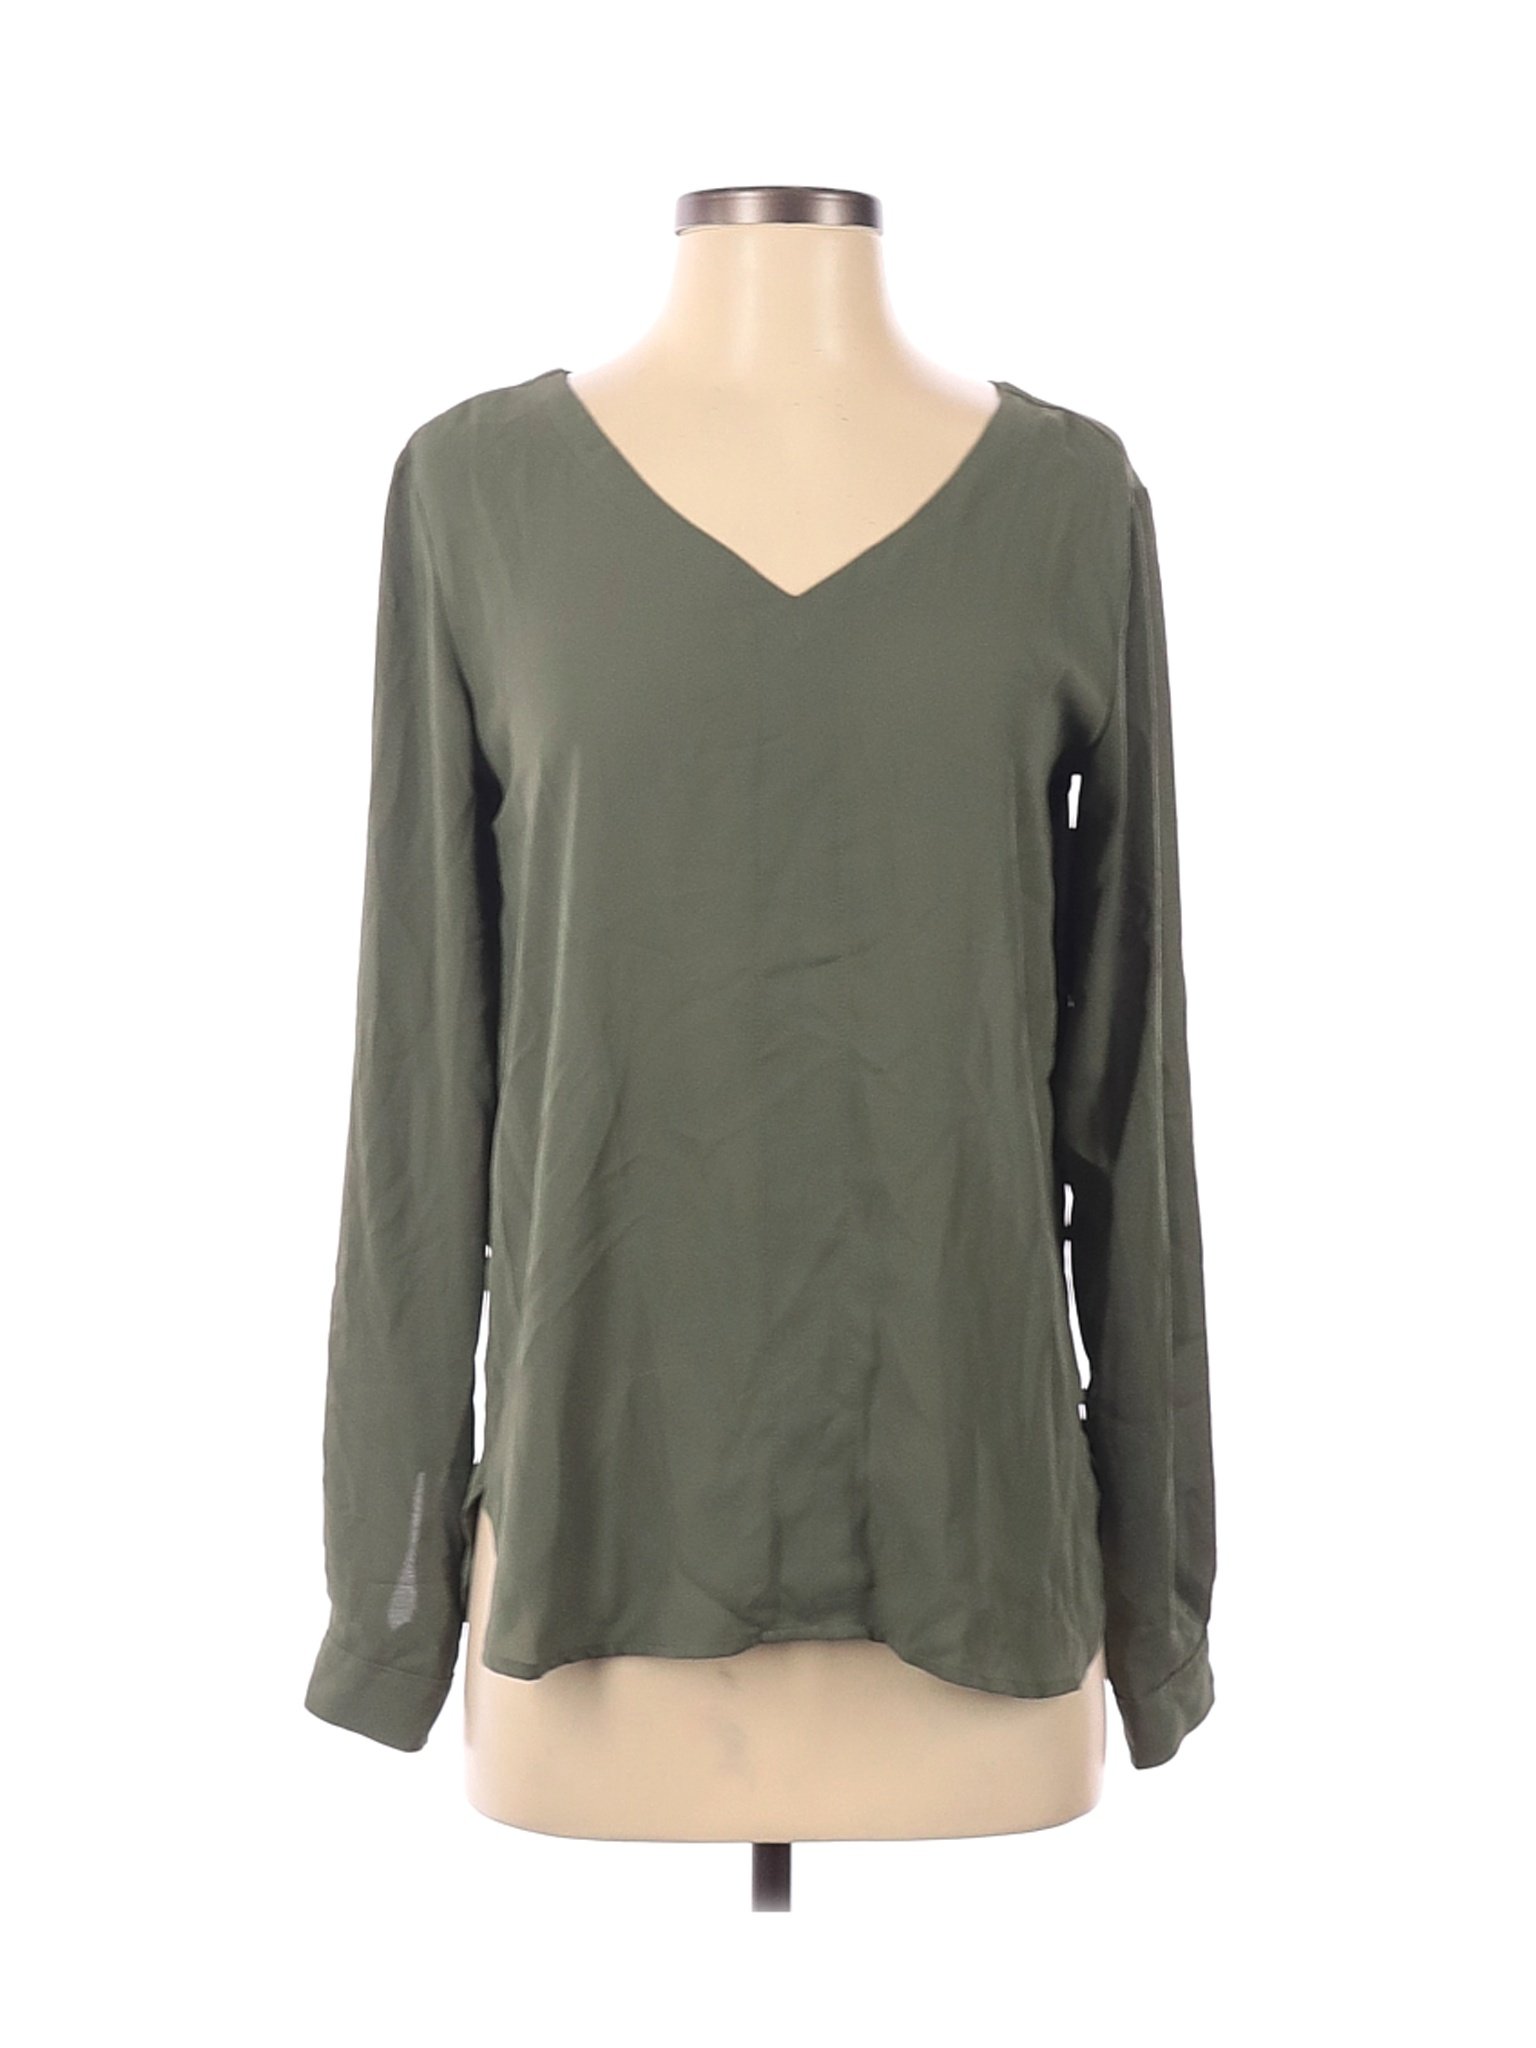 Ann Taylor LOFT Outlet 100% Polyester Solid Green Long Sleeve Blouse ...